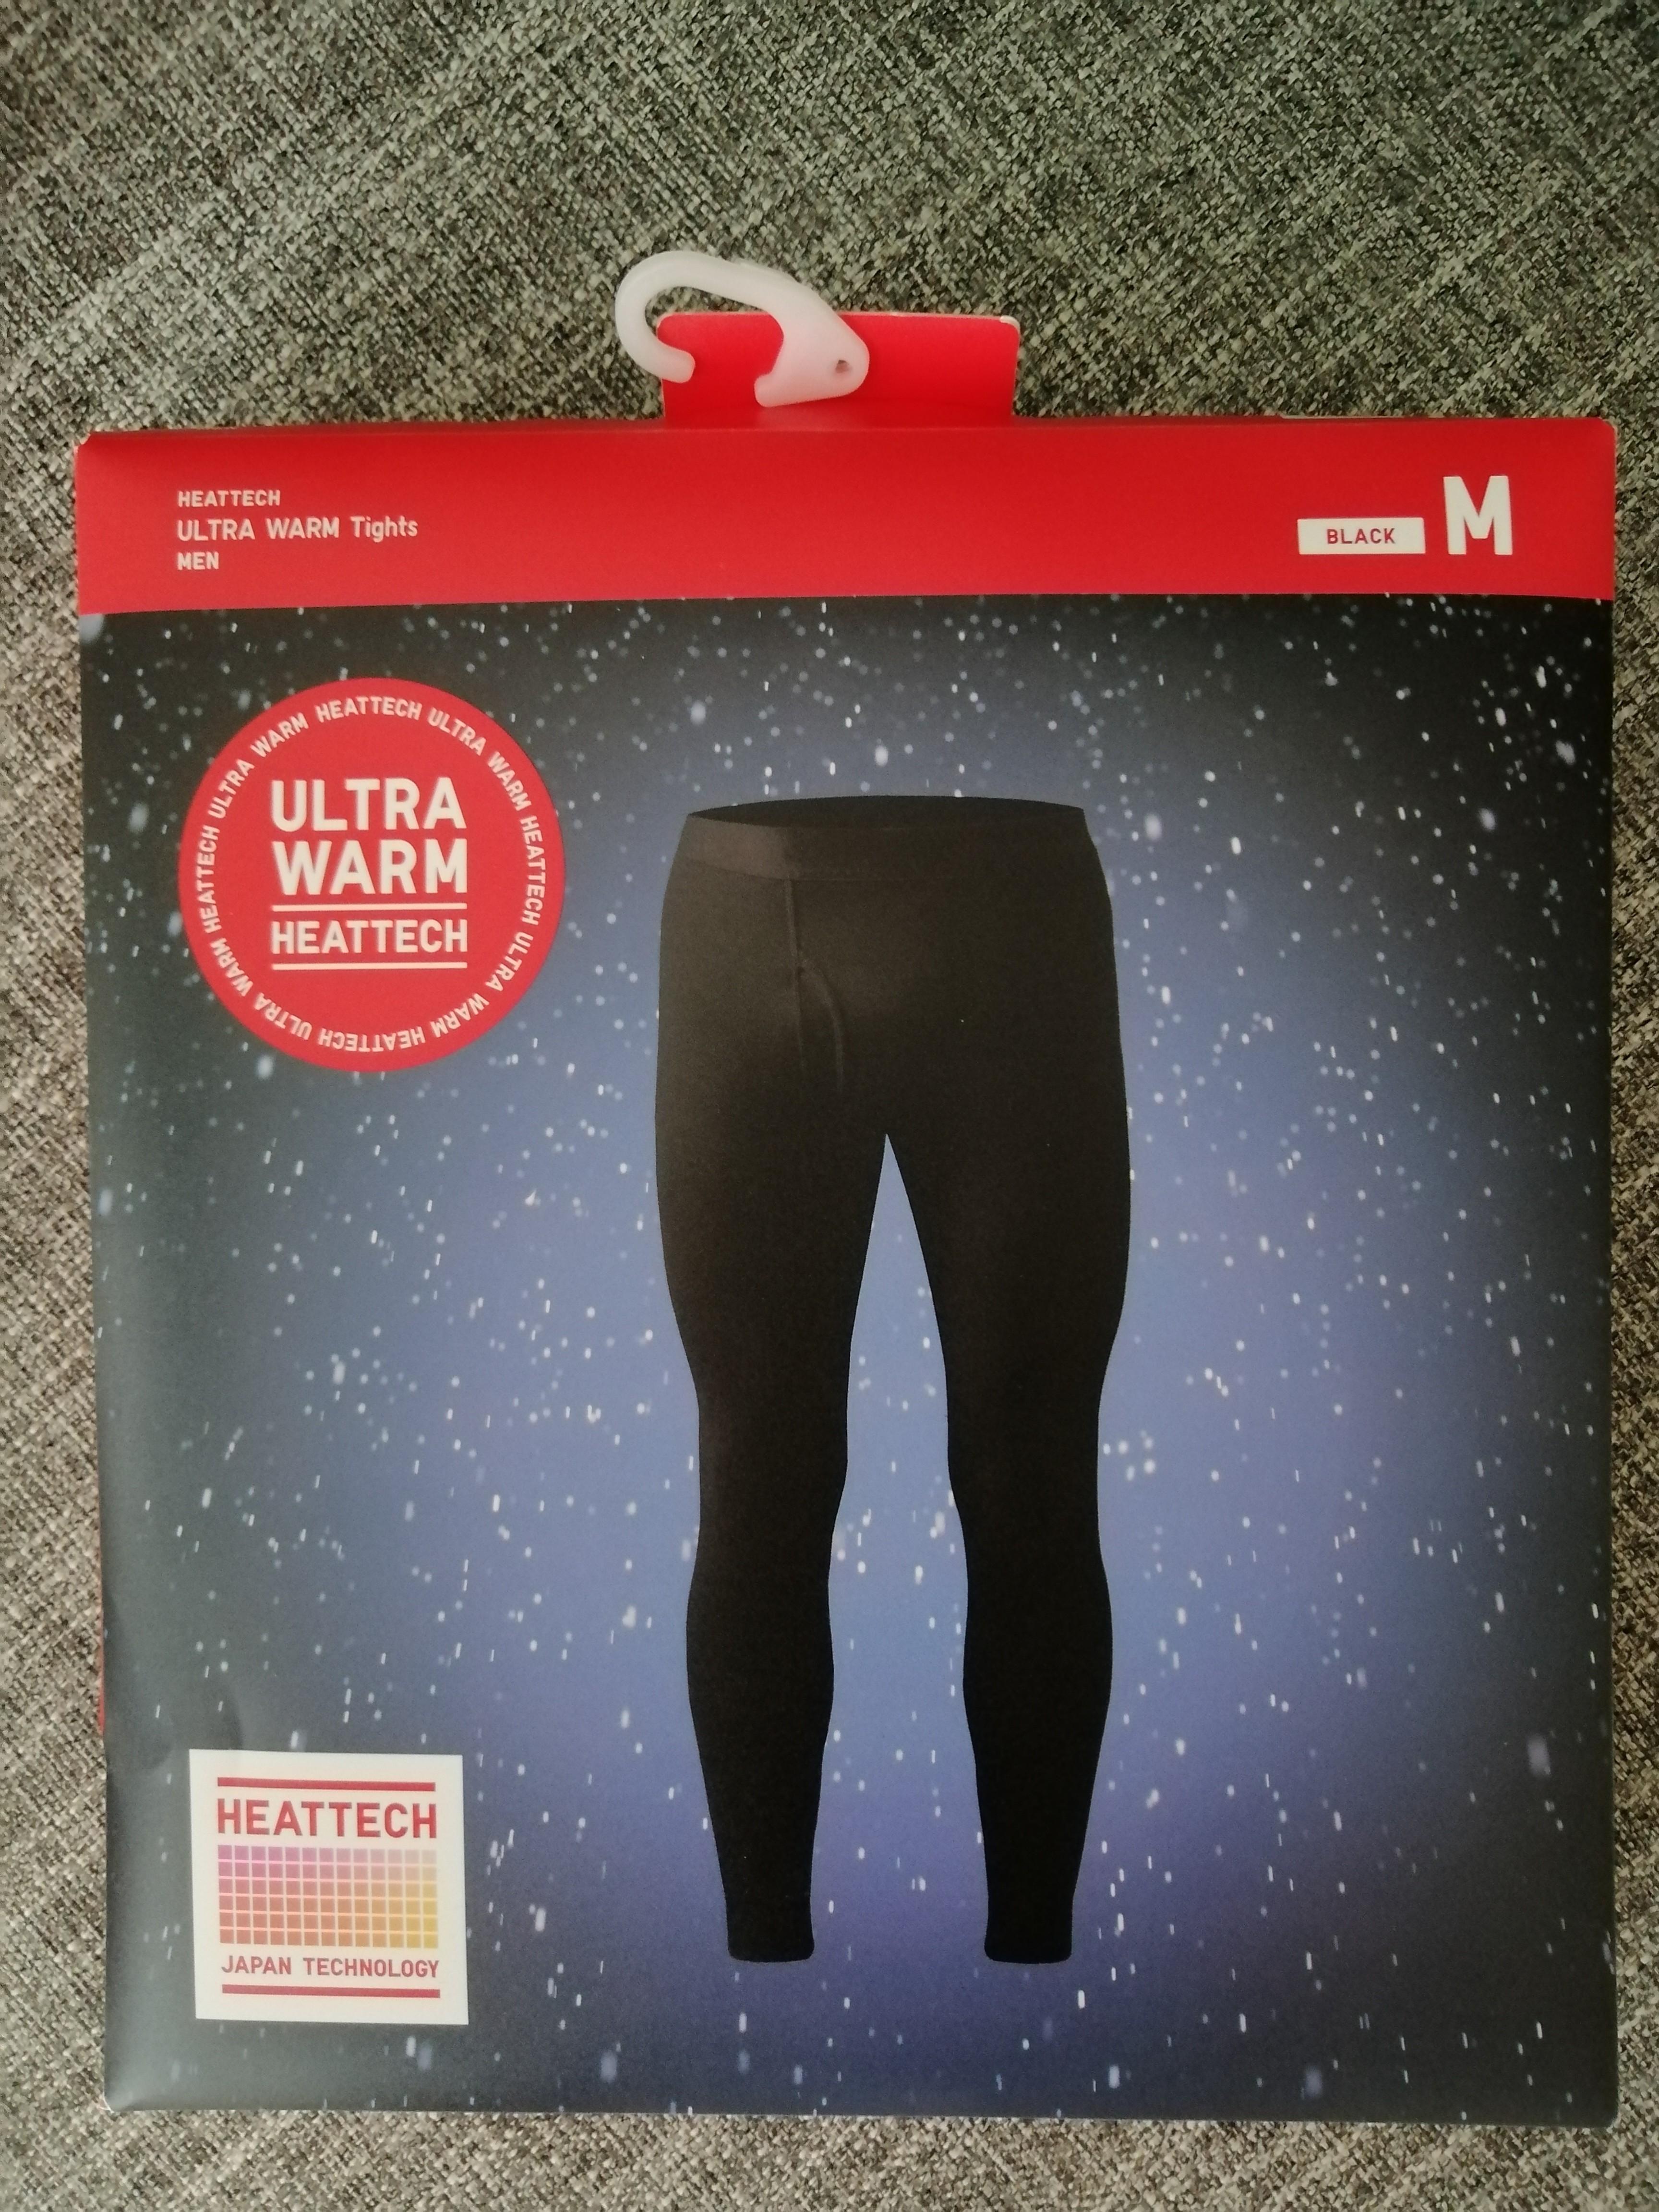 UNIQLO Malaysia - MEN HEATTECH Tights at RM39.90 (U.P. RM49.90) Shop it at:   WOMEN HEATTECH Leggings at RM39.90 (U.P.  RM49.90) Shop it at:  On Limited Offer from 18 -  24